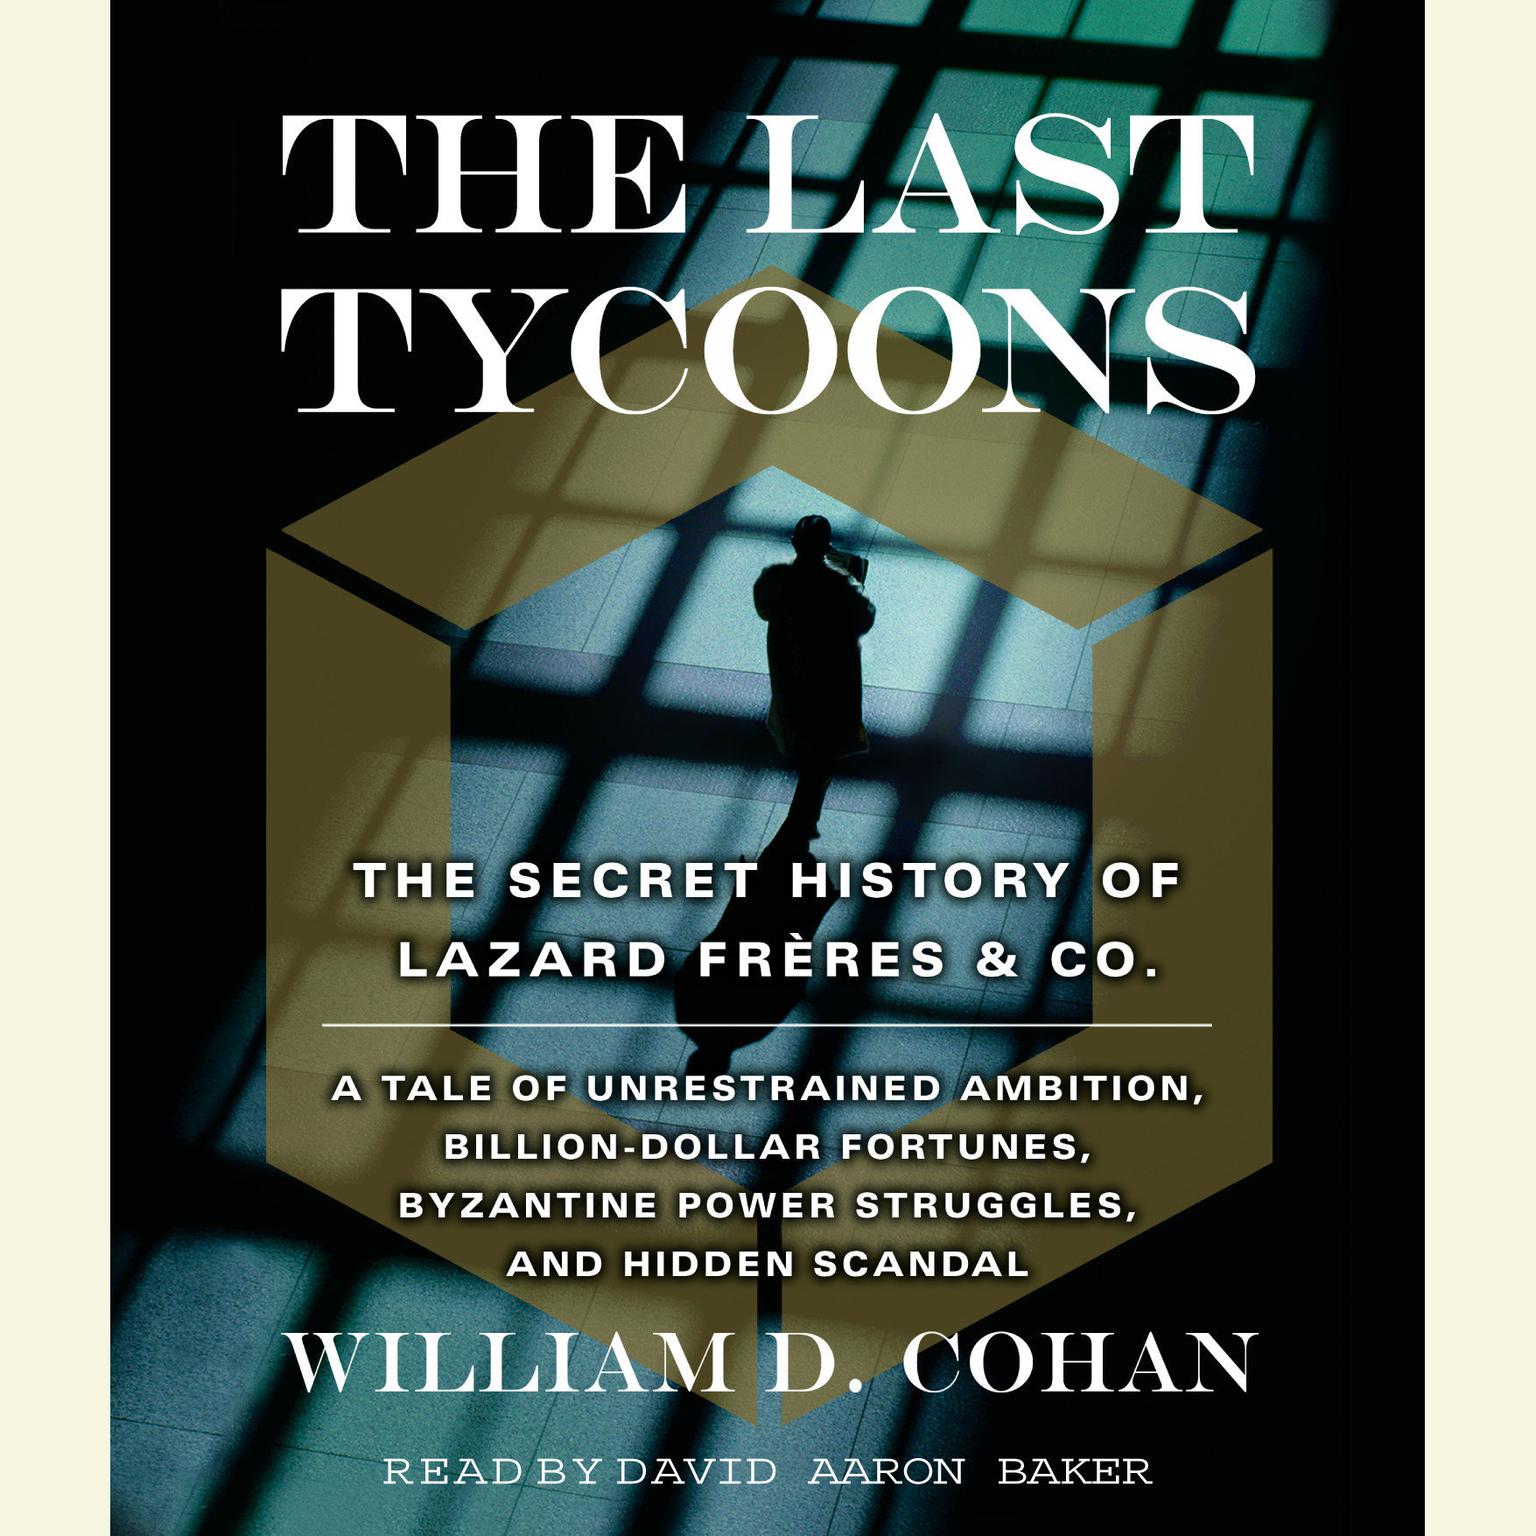 The Last Tycoons (Abridged): The Secret History of Lazard Freres & Co. Audiobook, by William D. Cohan